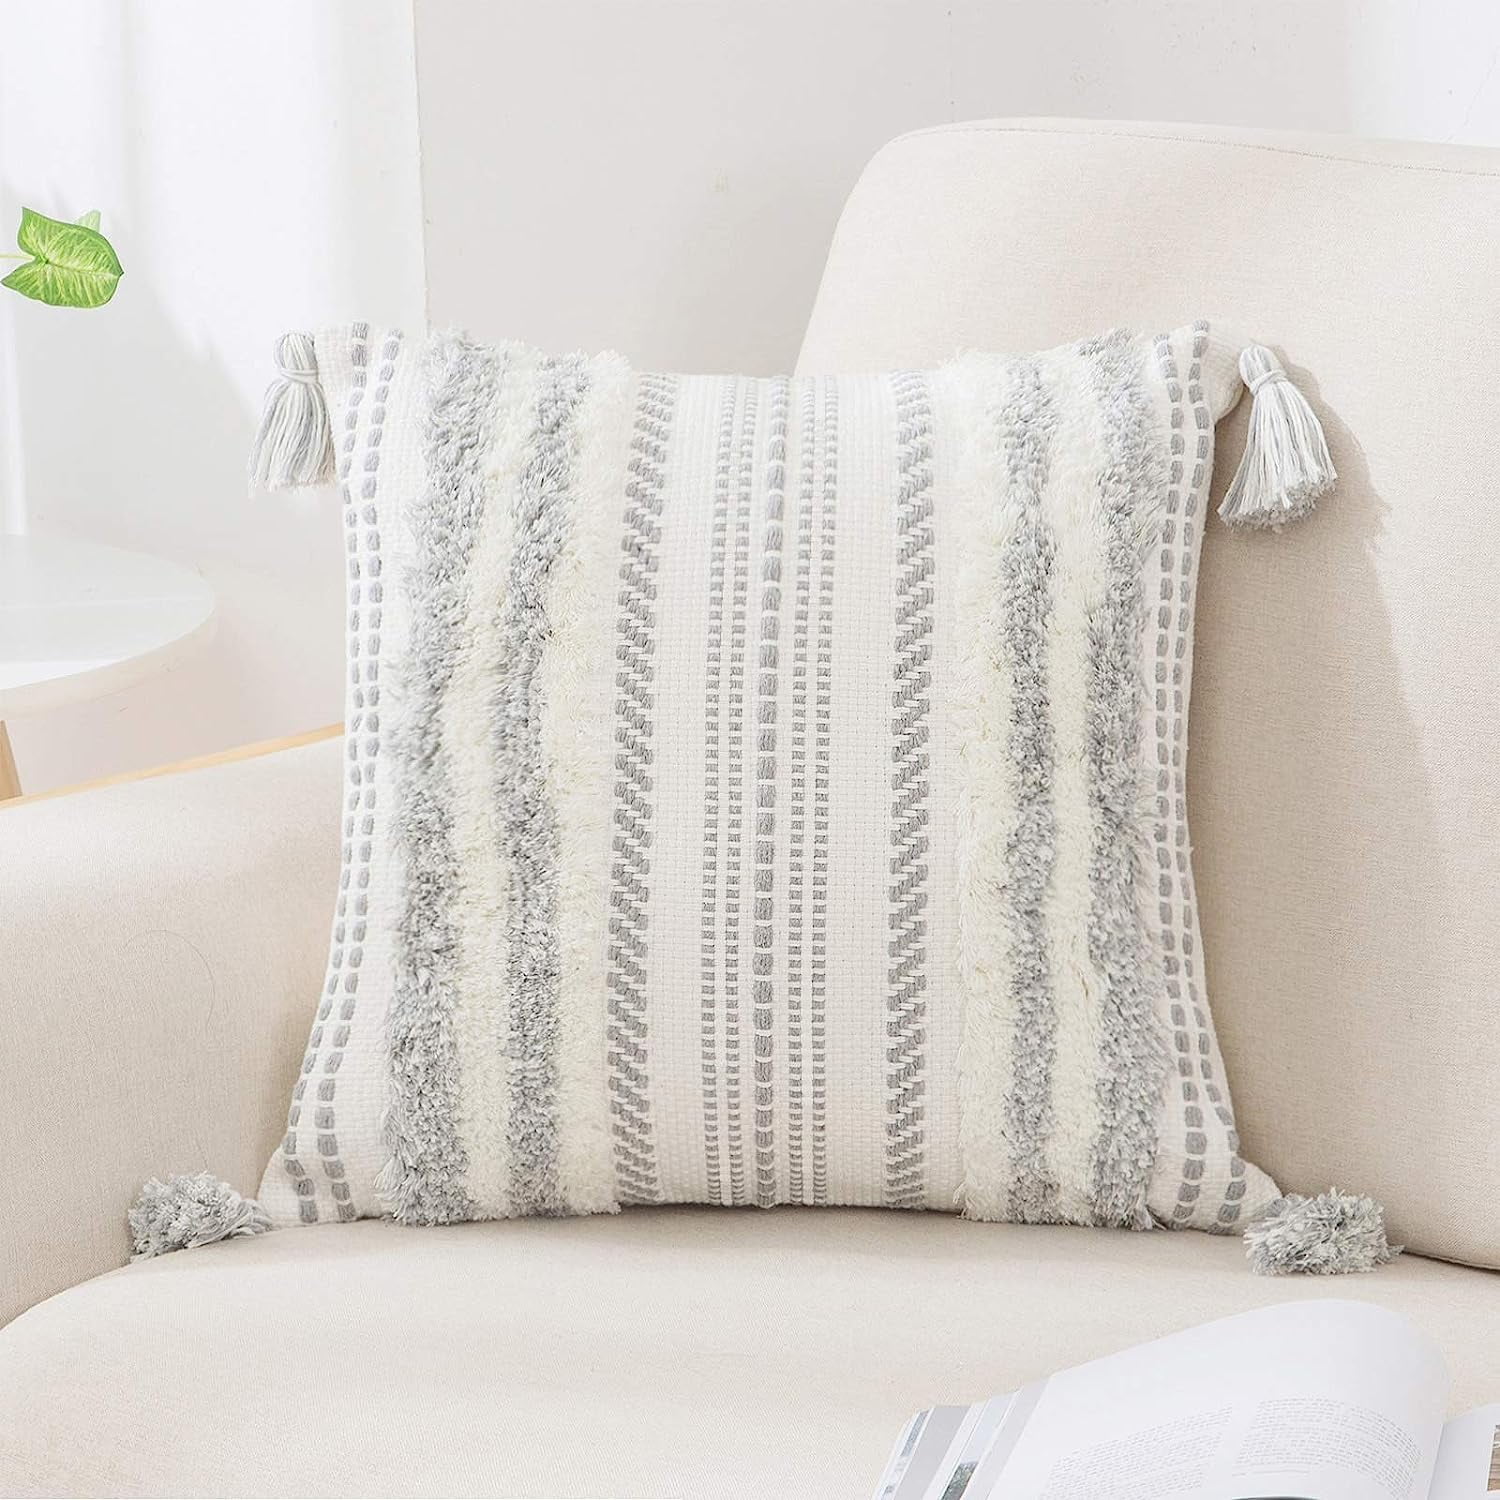 JASEN Blue and Beige Boho Decorative Throw Pillow Cover, Woven Tufted  Pillow Cover with Tassels Diamond Pattern Pillow Covers for Couch Sofa  Bedroom